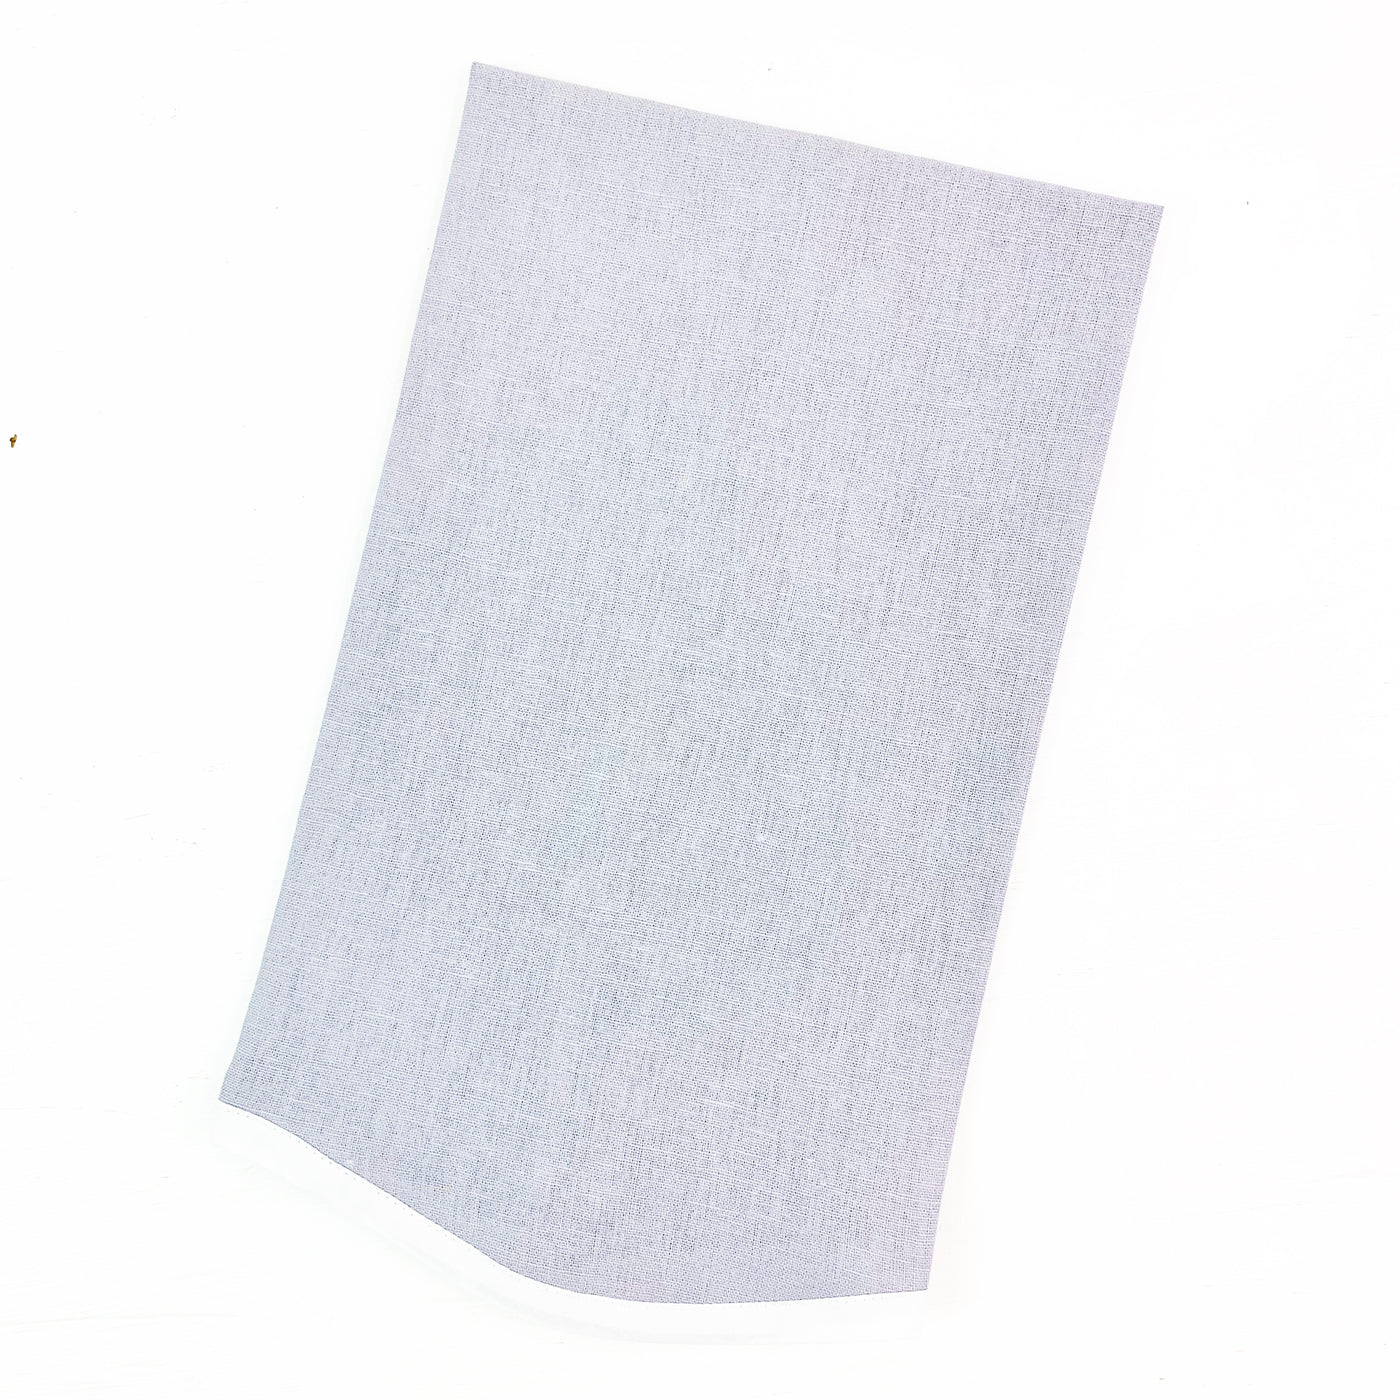 Scalloped Edge Linen Guest Towel With White Trim